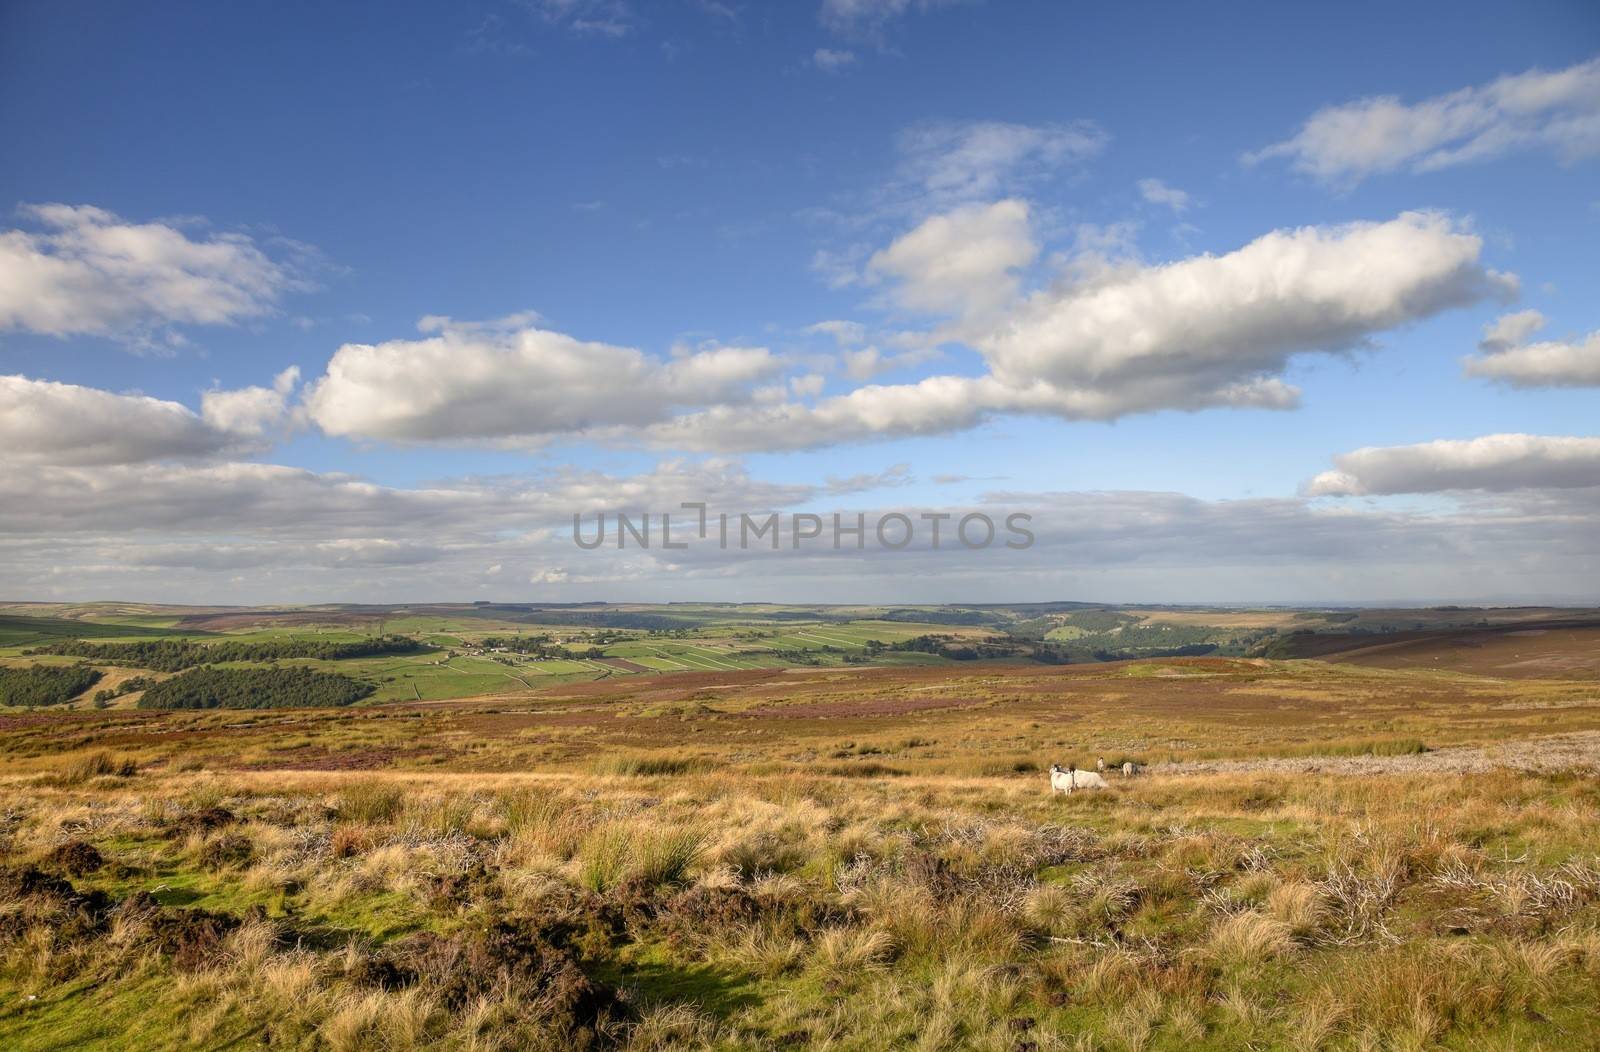 Moorland with heather near Reeth, Yorkshire Dales National Park, England.